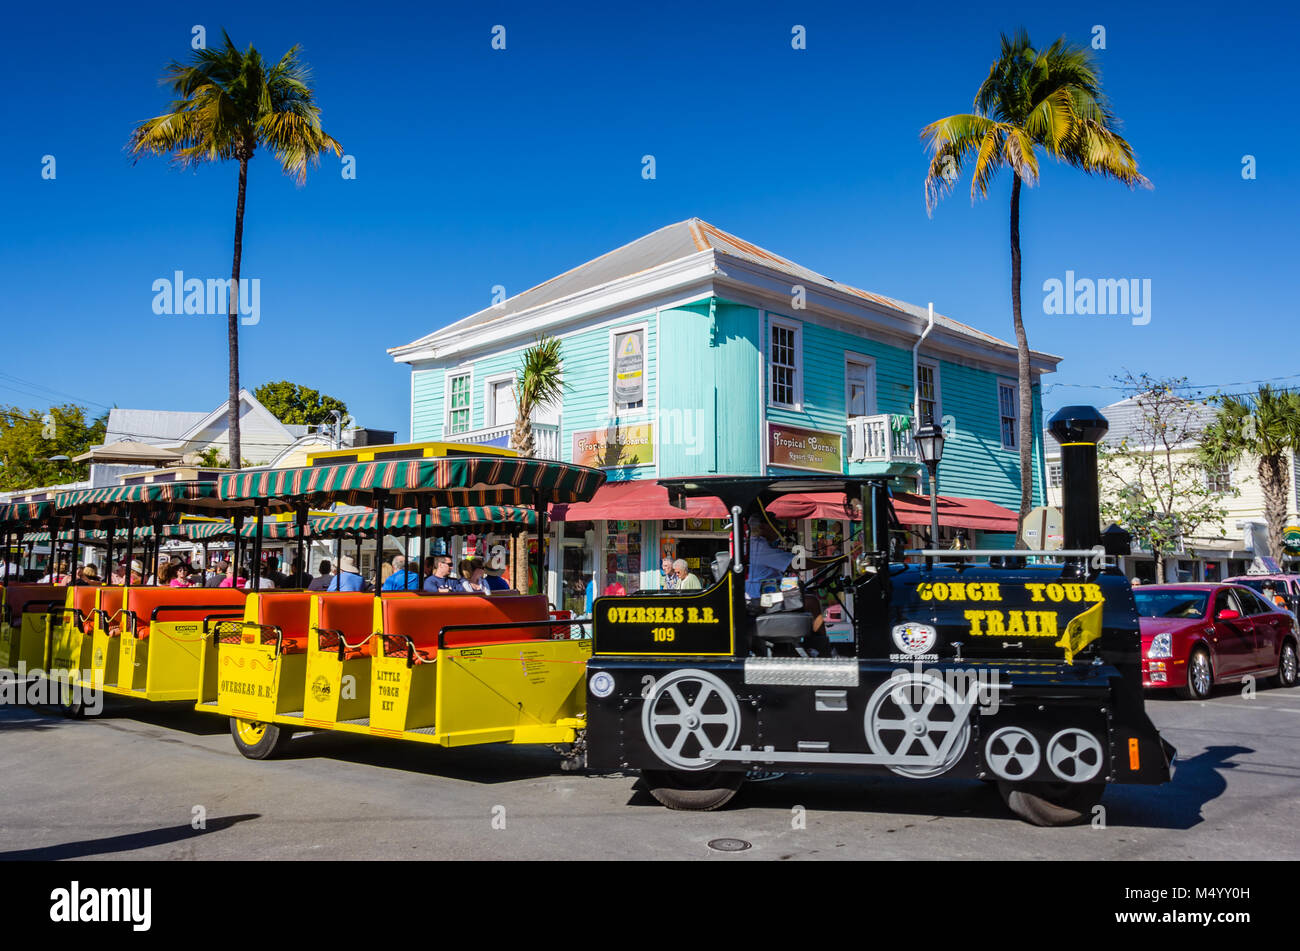 Tours of Key West, FL aboard the colorful Conch Tour Train seen here turning the corner of Green Street. Stock Photo